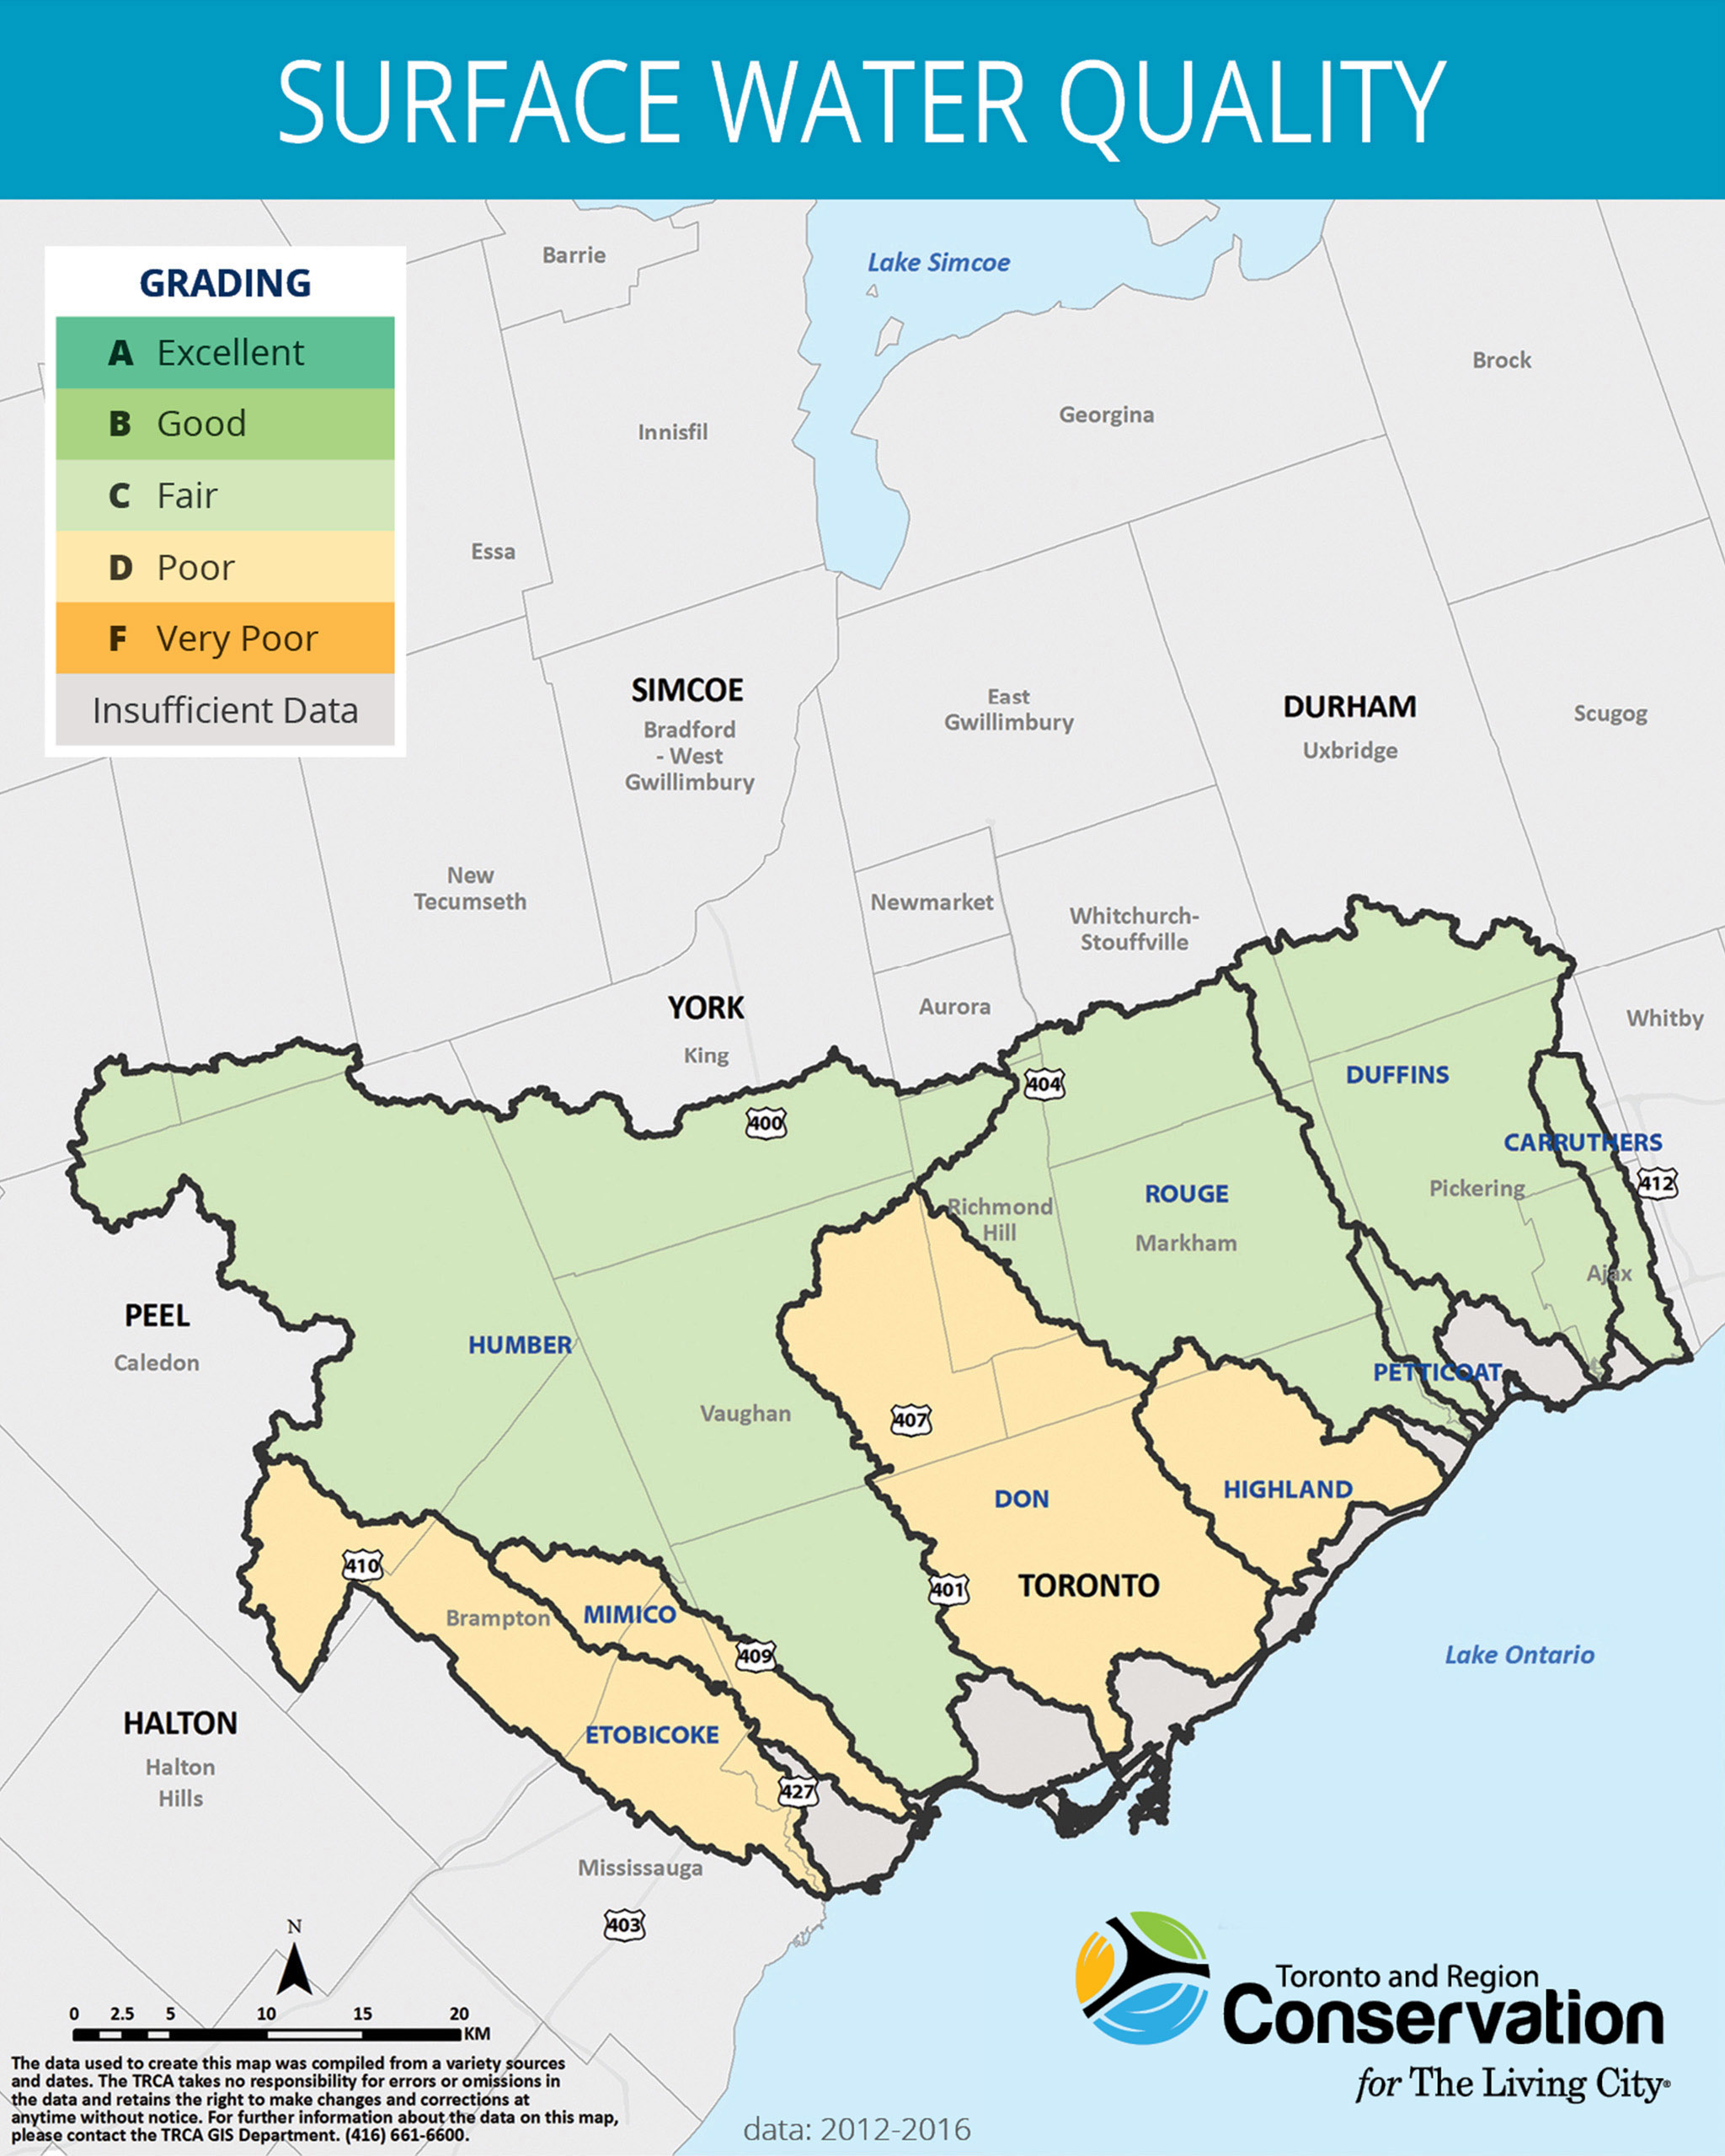 map of surface water quality in TRCA jurisdiction